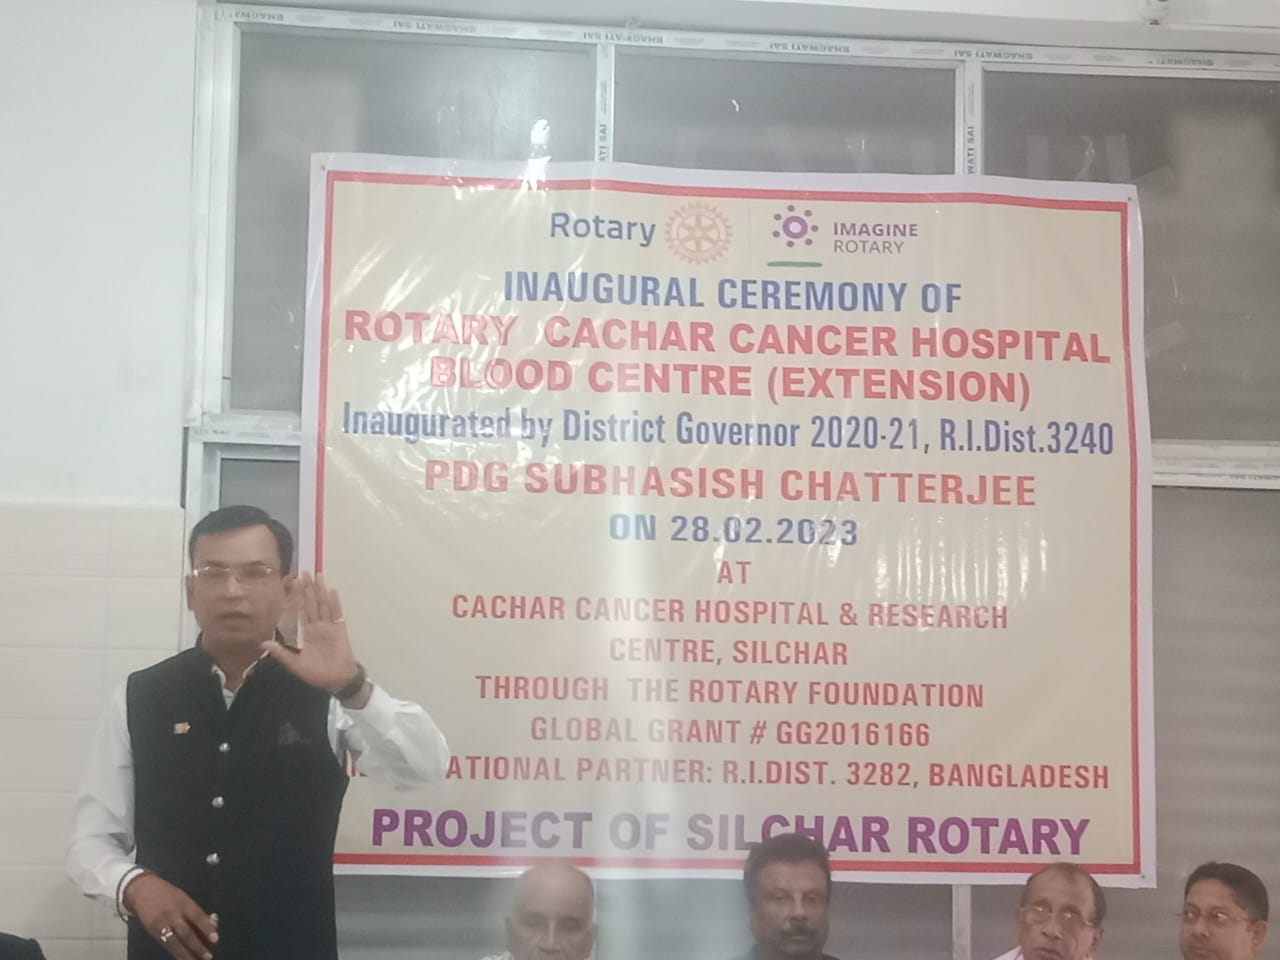 Inaugural Ceremony of Rotary Cachar Cancer Hospital Blood Centre (Extension)